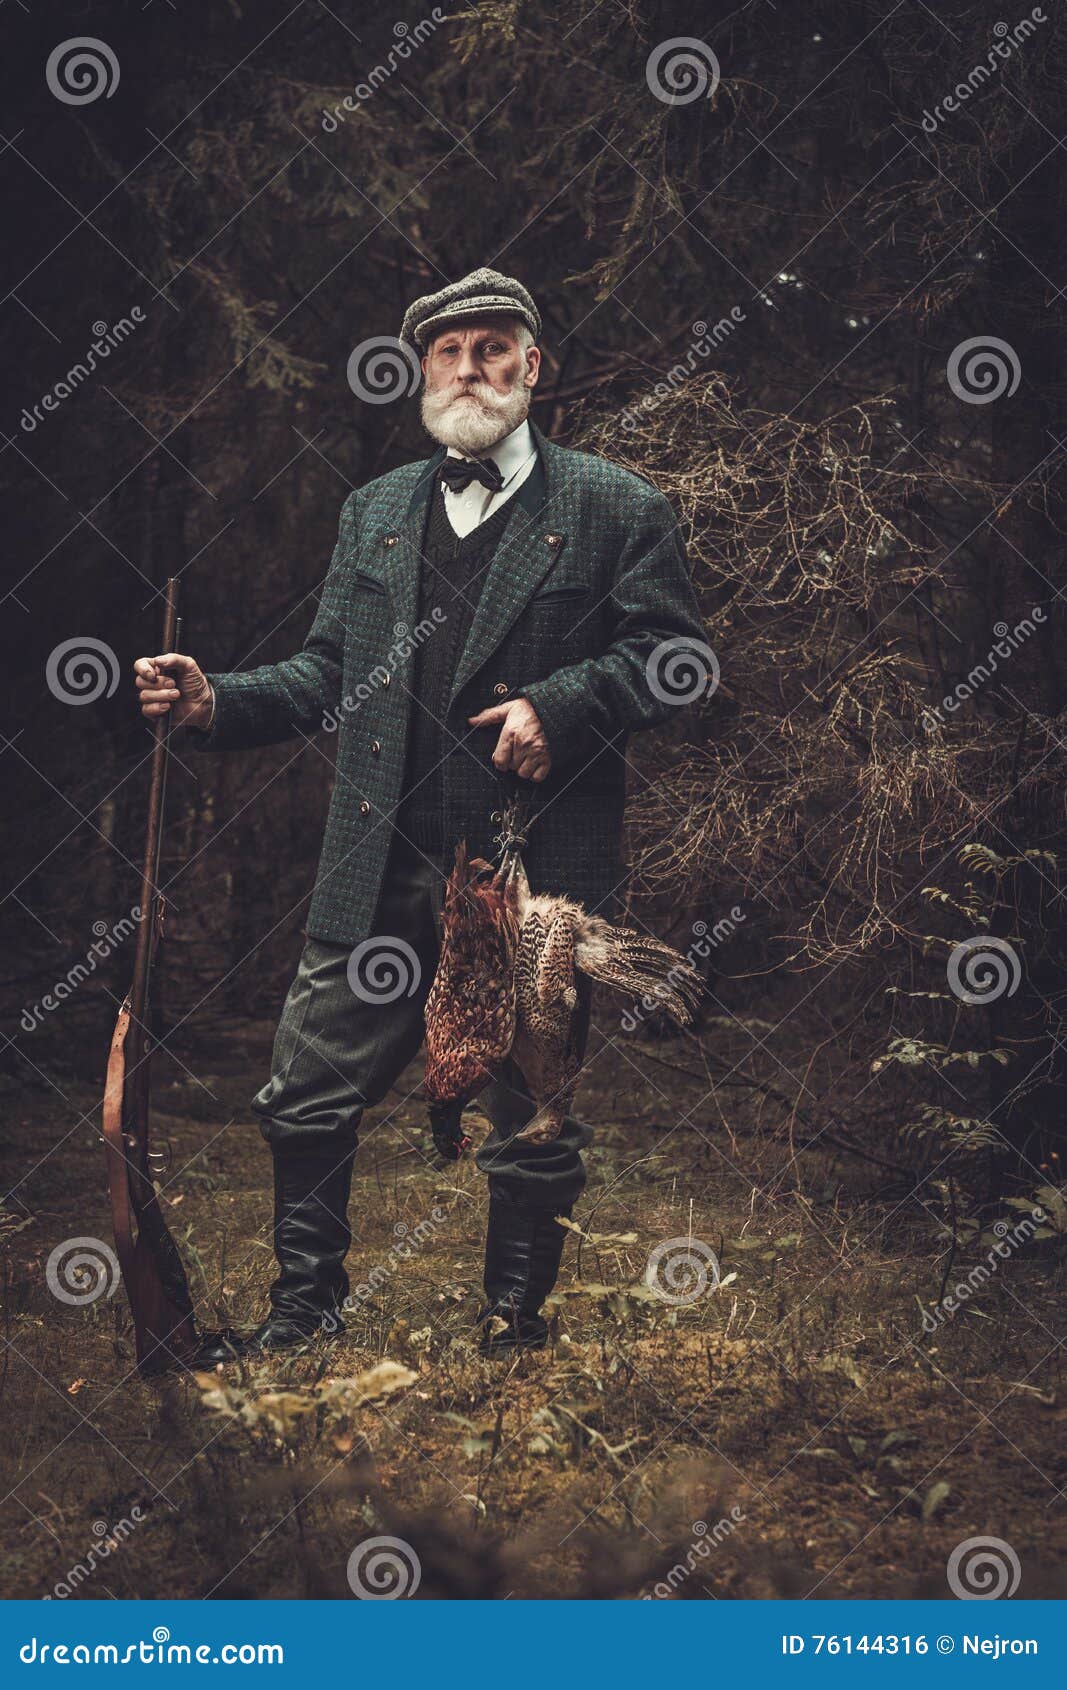 senior hunter with a shotgun and pheasants in a traditional shooting clothing, posing on a dark forest background.